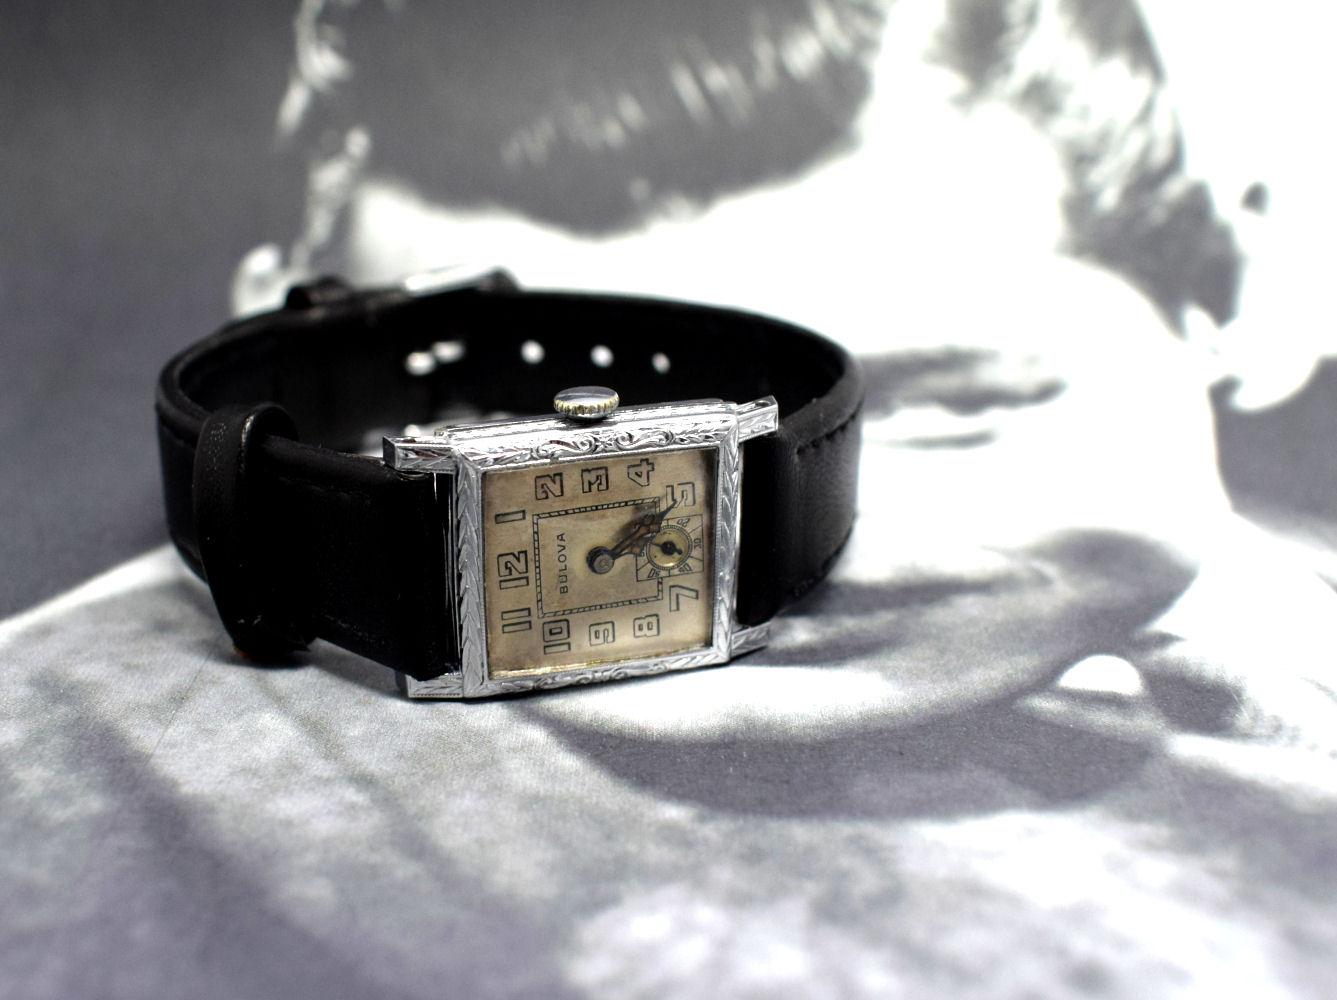 On offer is a fine quality very stylish Art Deco 1930's mens wristwatch by BULOVA . This watch has been fully and professionally serviced.
The case is finished in 14-karat gold fill as confirmed on the inside of the hinged case back together with